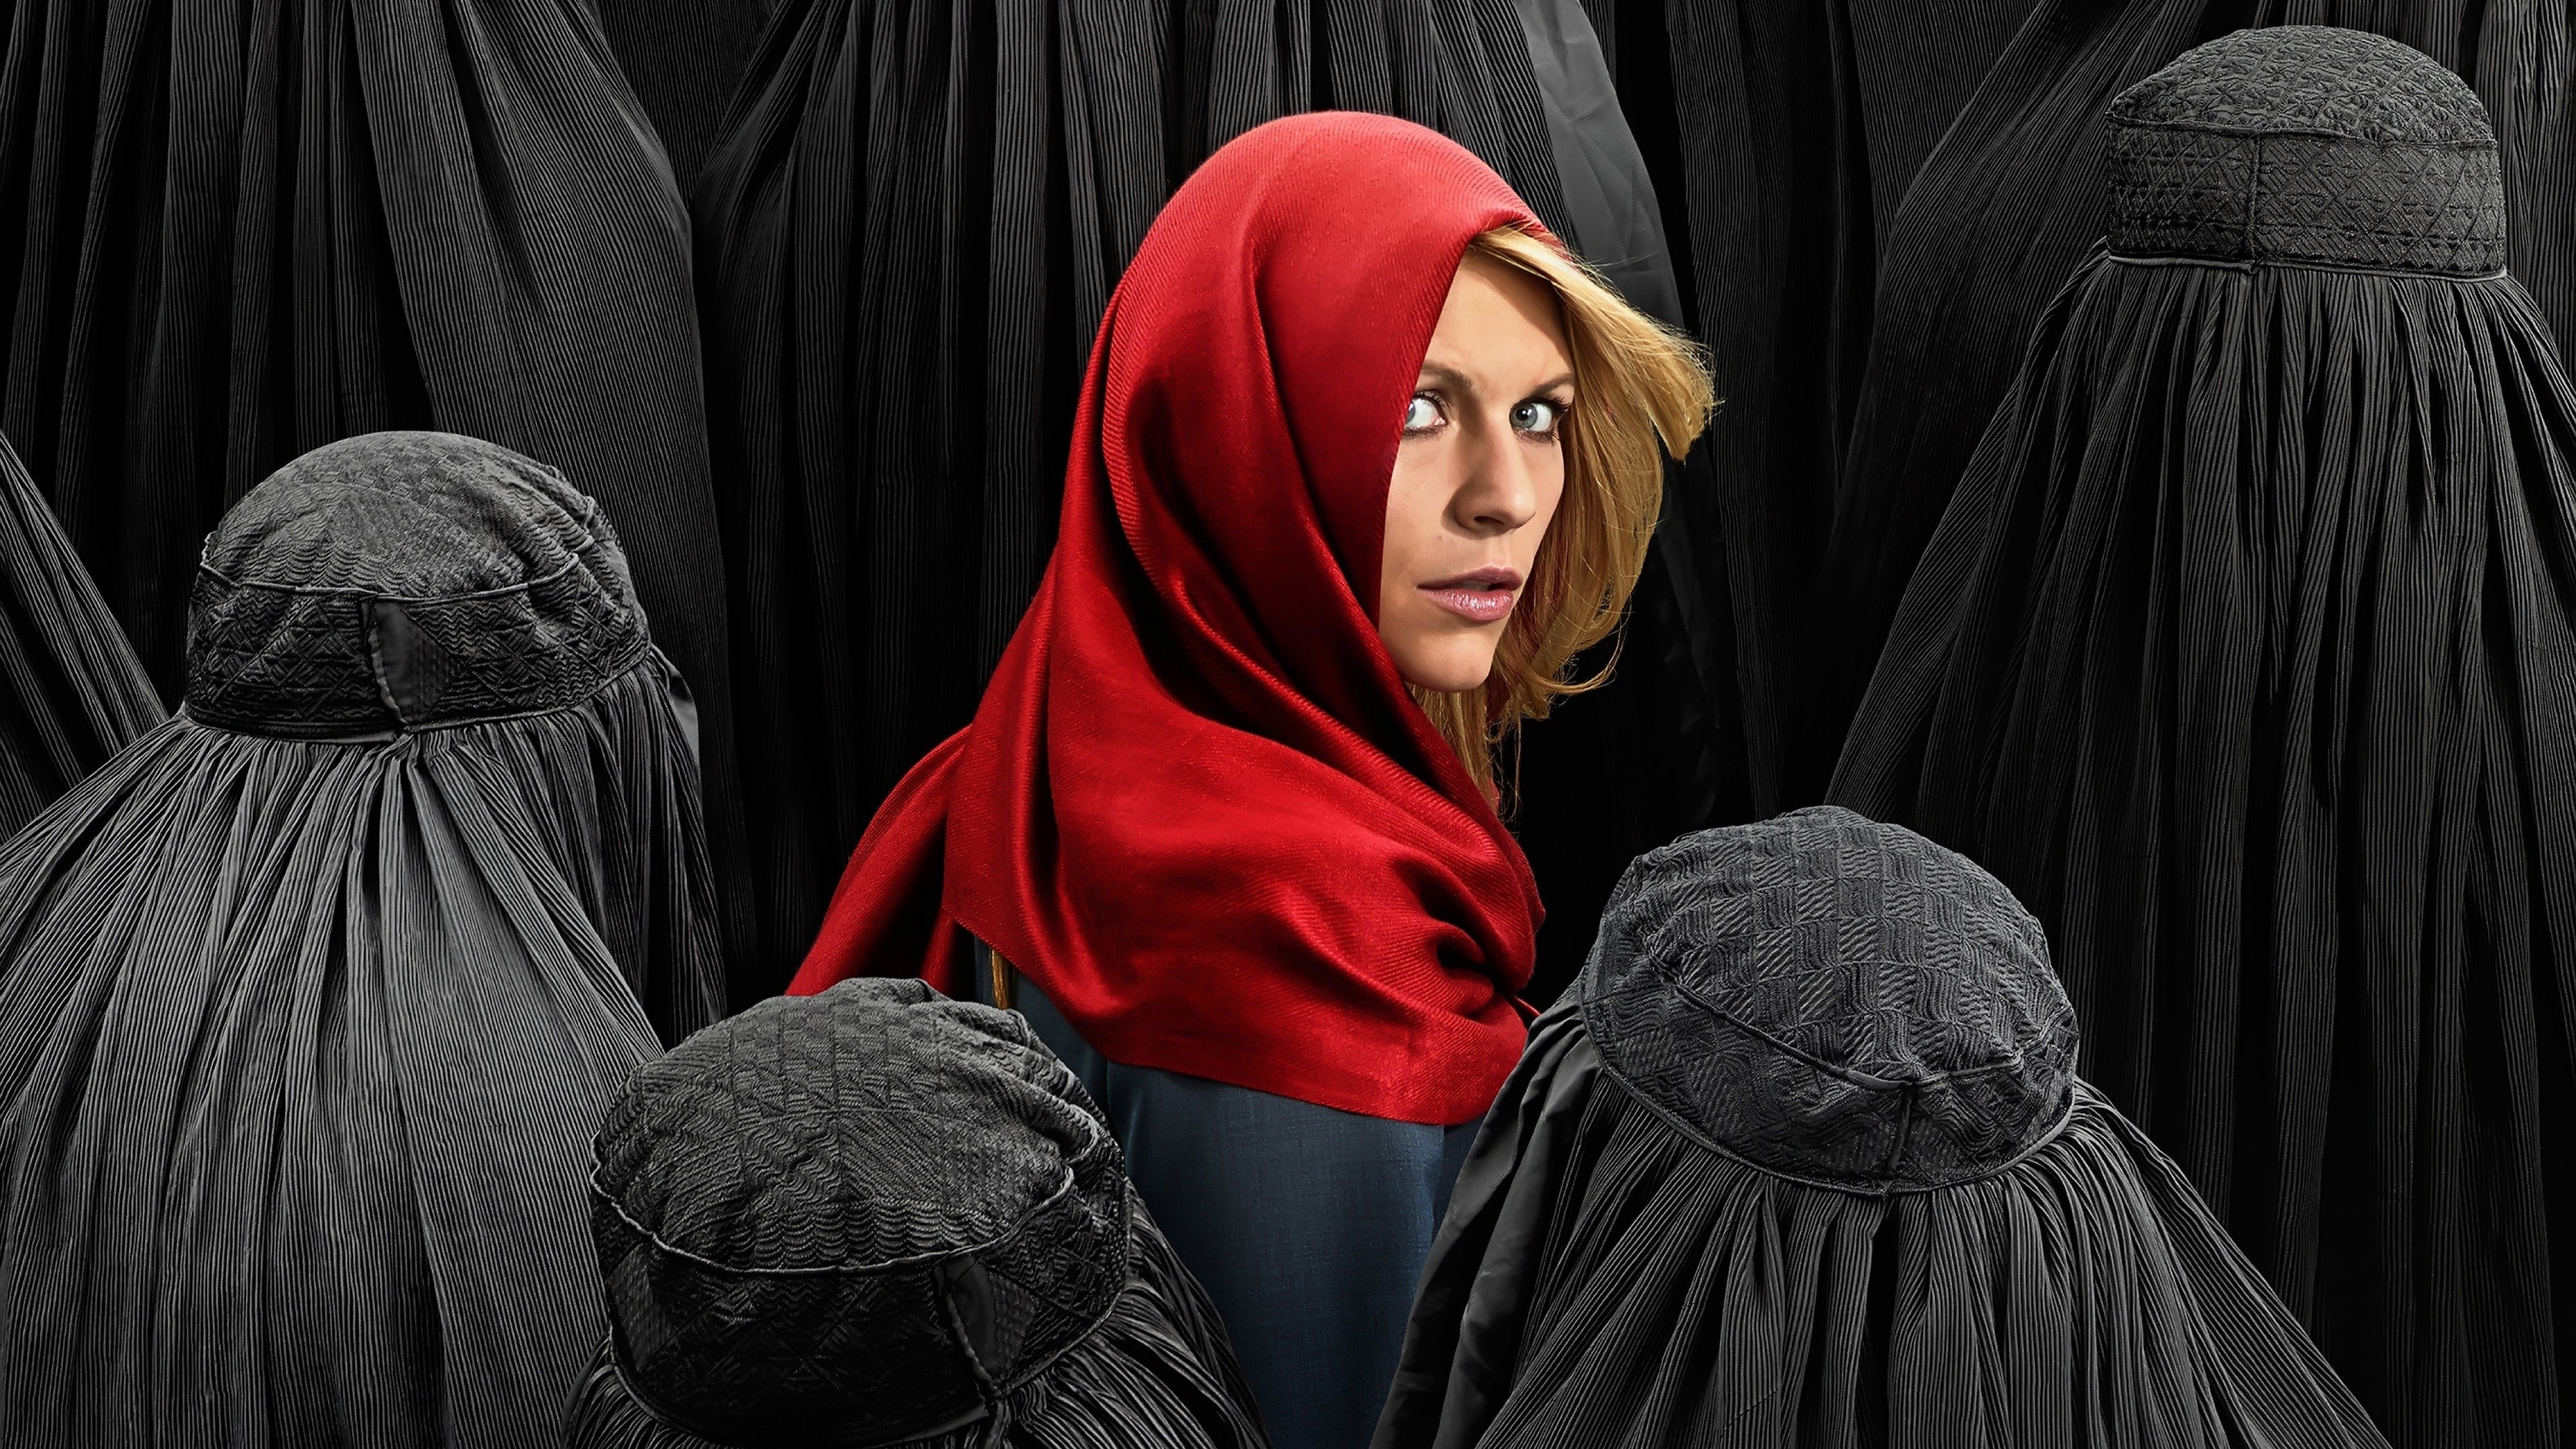 Claire Danes: Starred as Carrie Mathison in the Showtime drama series Homeland. 3840x2160 4K Wallpaper.